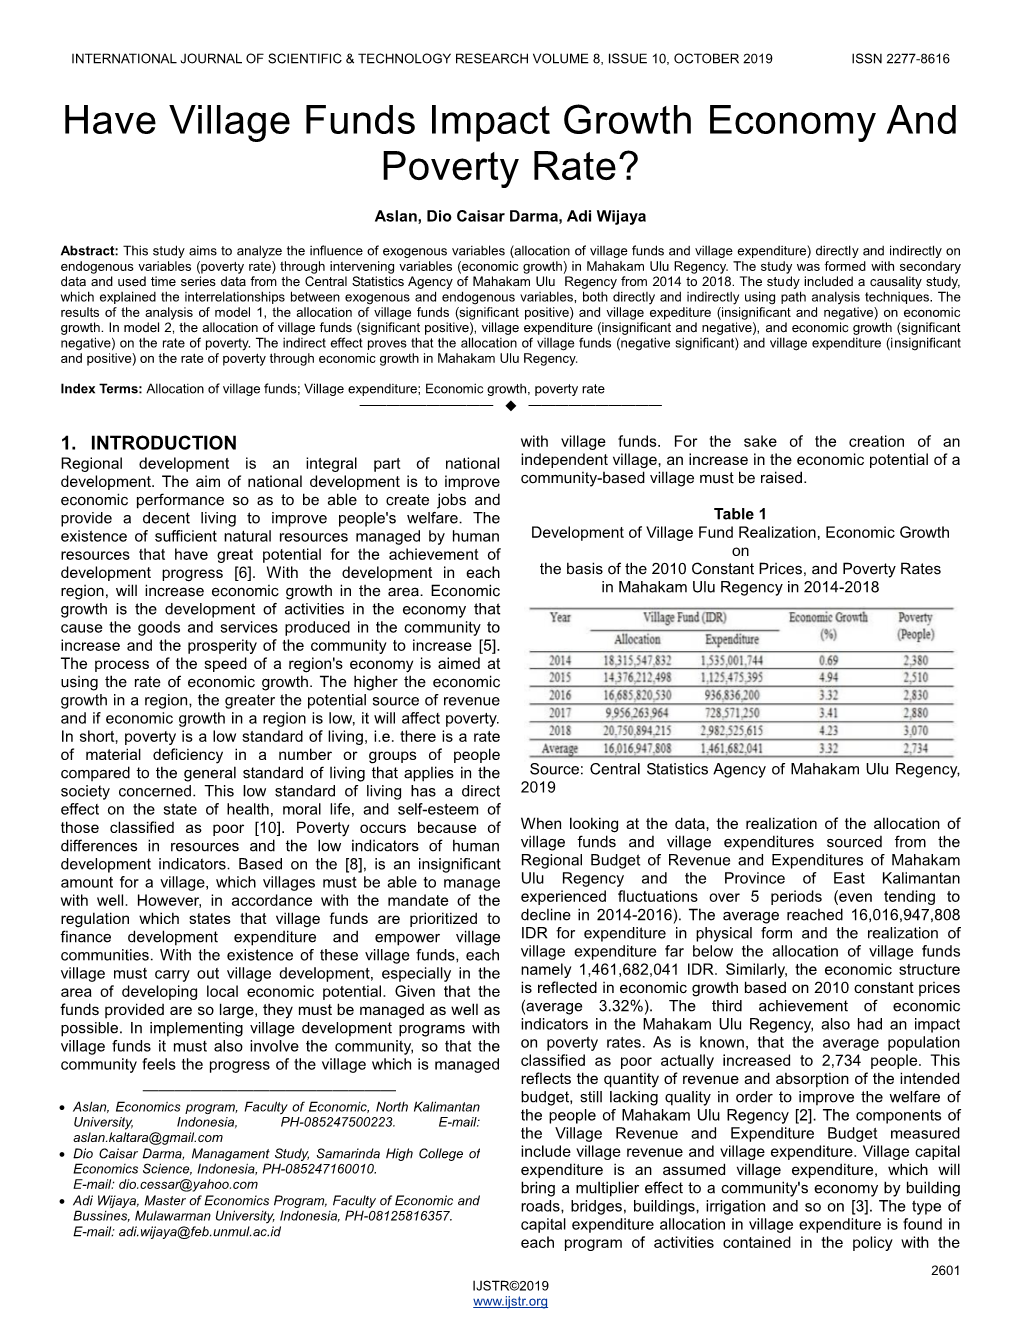 Have Village Funds Impact Growth Economy and Poverty Rate?